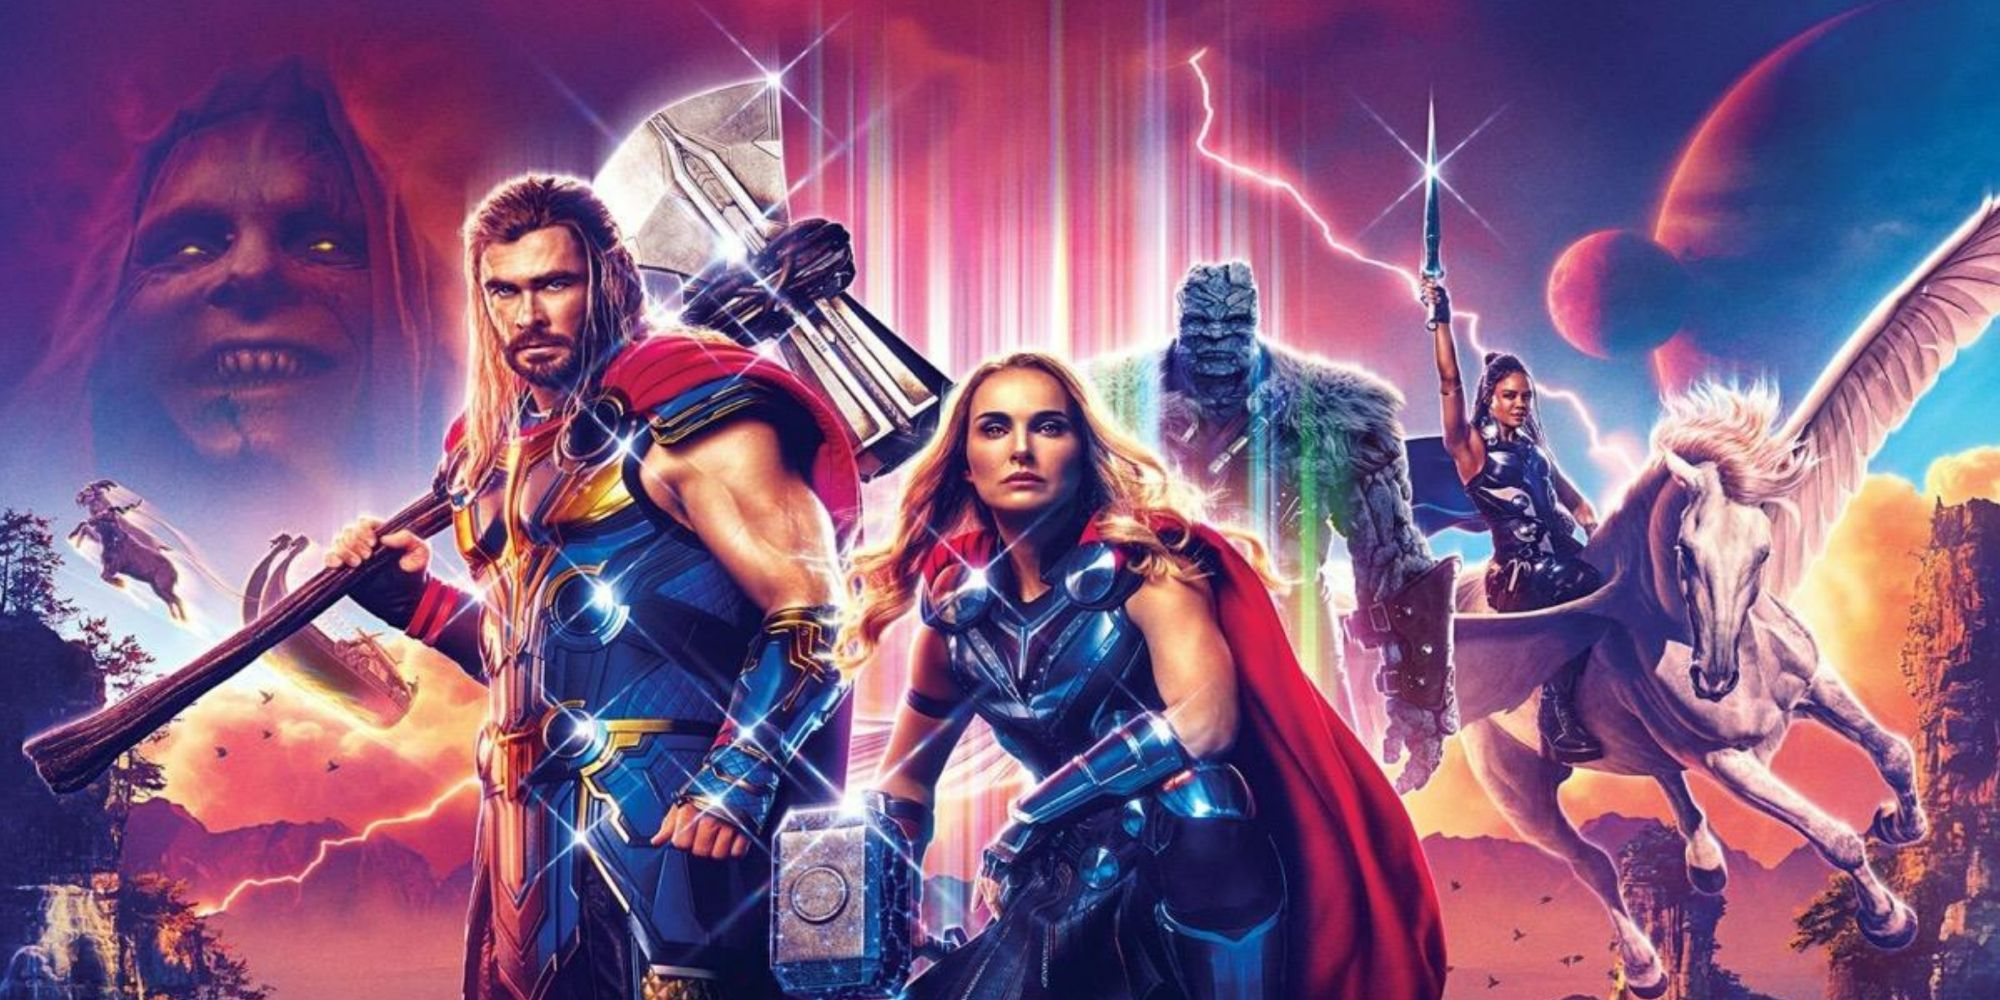 A promotional poster for Phase 4's Thor: Love and Thunder, with Thor played by Chris Hemsworth, Jane Foster played by Natalie Portman, Valkyrie played by Tessa Thompson, Korg played by Taika Waititi and Gorr the God Butcher played by Christian Bale.